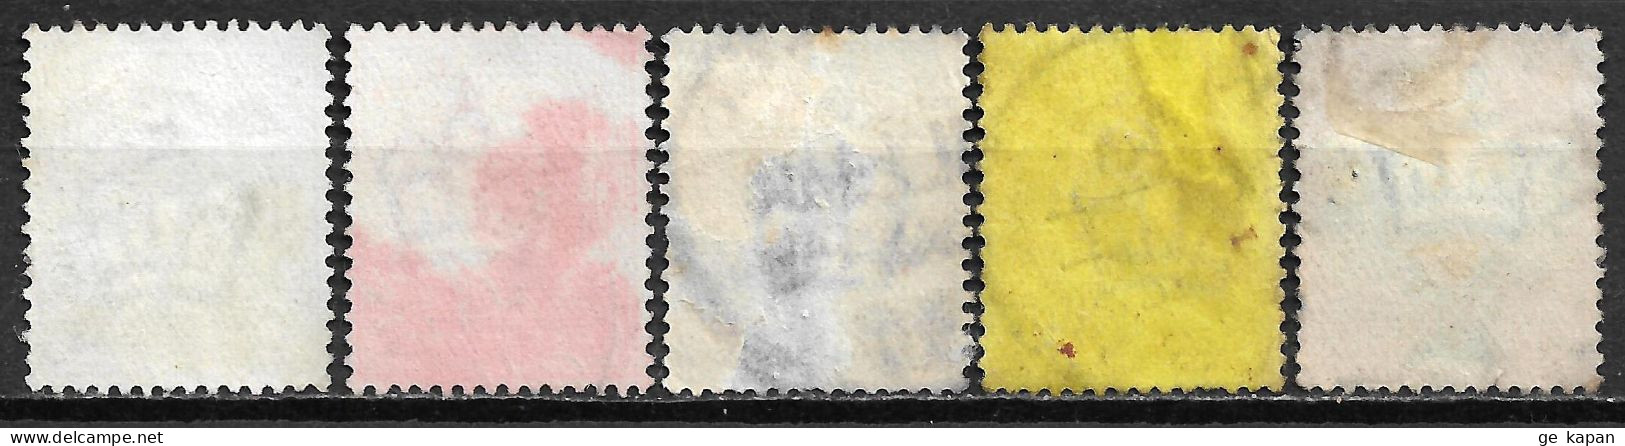 1902,1904 GREAT BRITAIN Set Of 5 Used Stamps Perf.14 (Scott # 128,131-133,143) CV $69.00 - Used Stamps